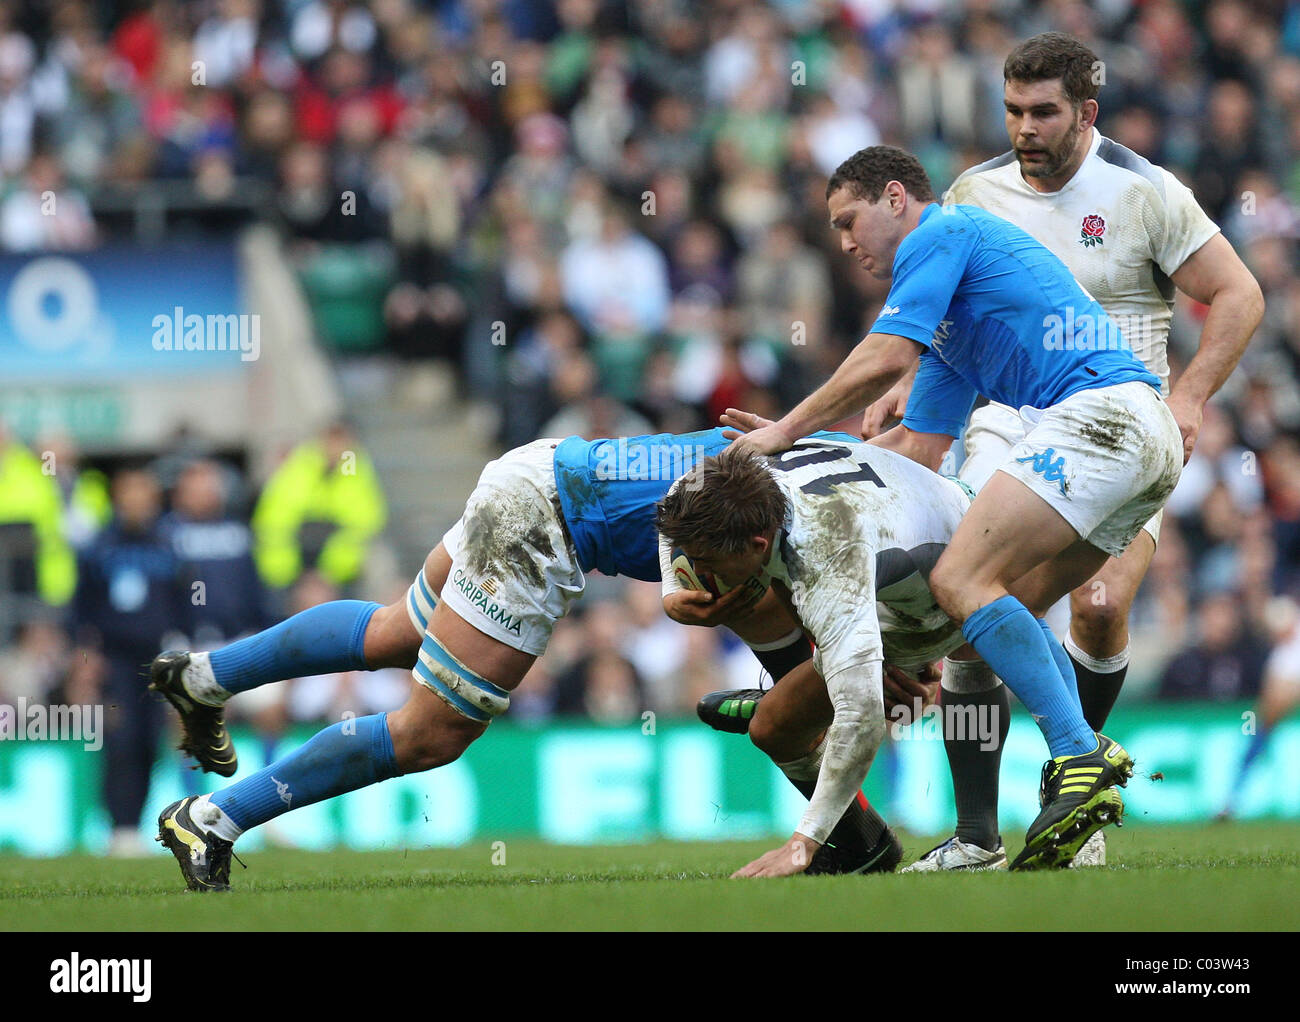 12.02.2011 RBS 6 Nations Rugby Union from Twickenham. England v Italy. T. Flood (10) of England is tackled during an action. Stock Photo